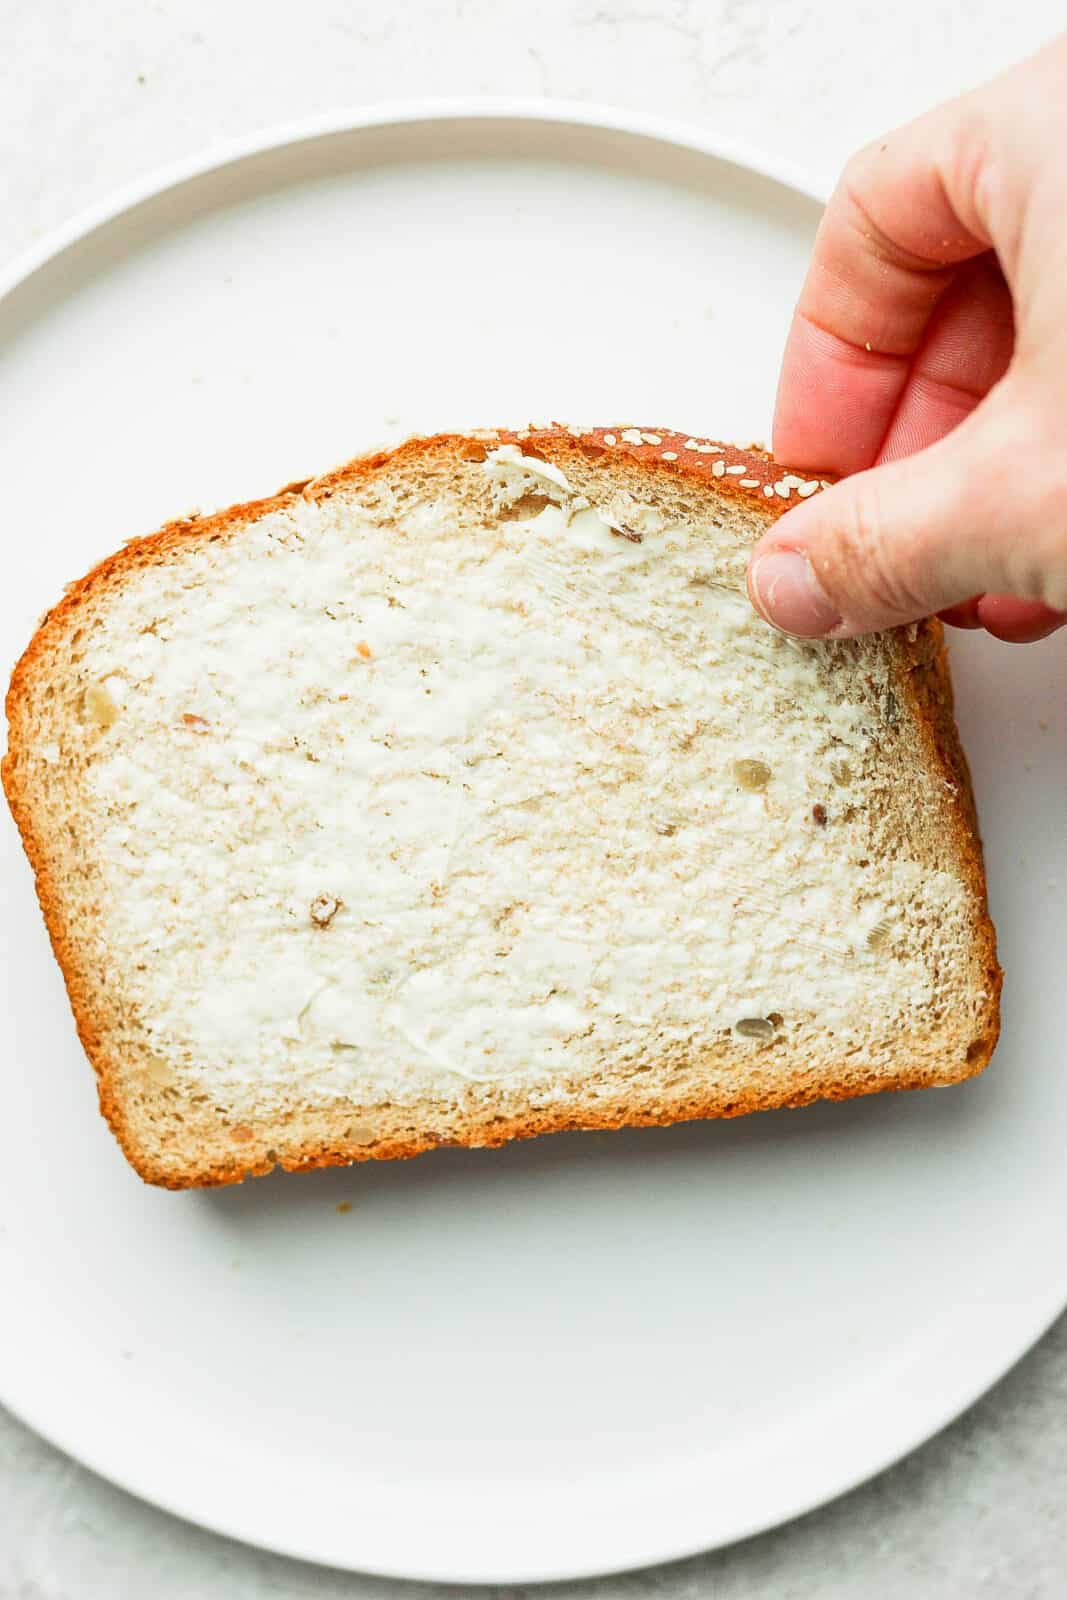 A hand placing the top piece of buttered bread on the sandwich.